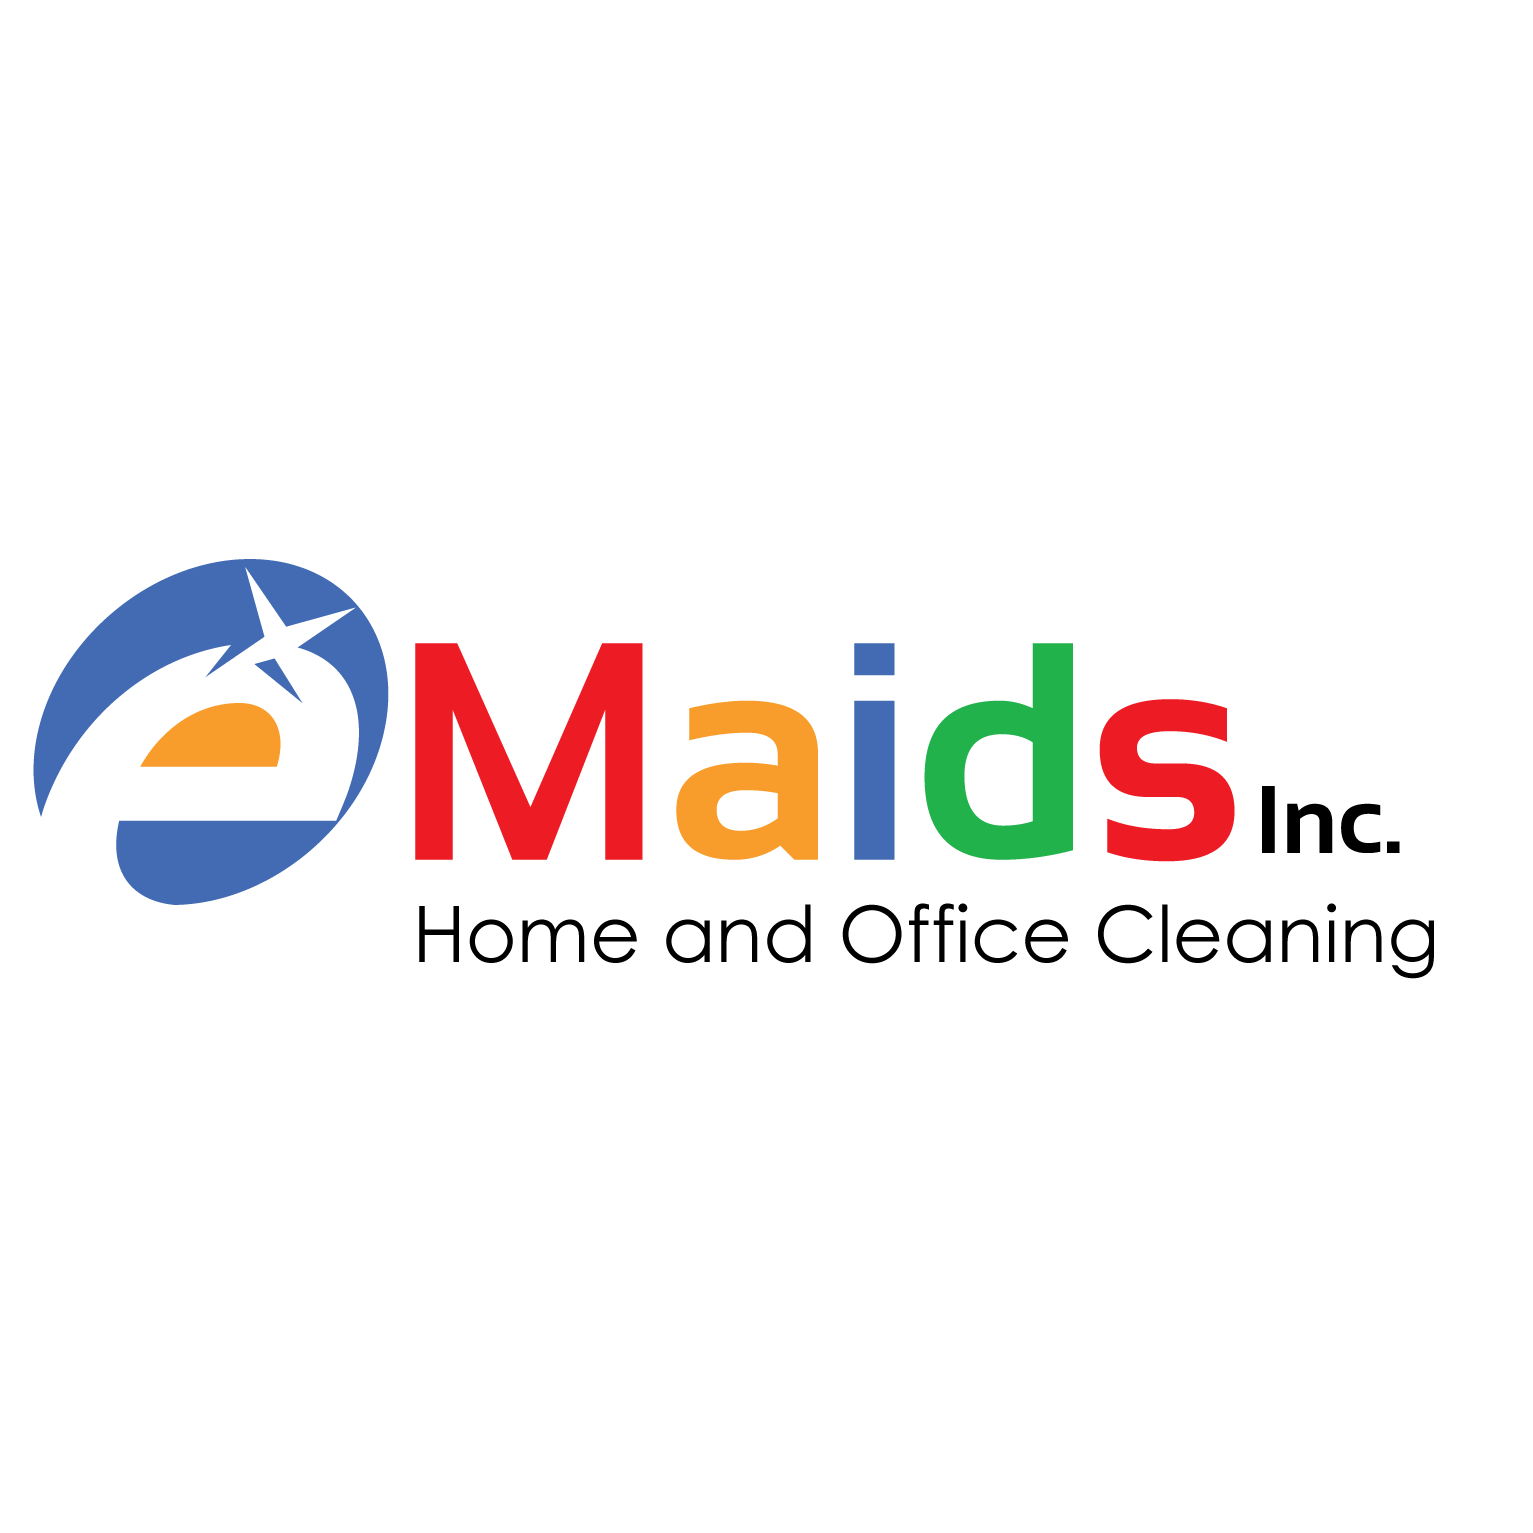 eMaids Cleaning Service of NYC - New York, NY 10001 - (212)390-1877 | ShowMeLocal.com